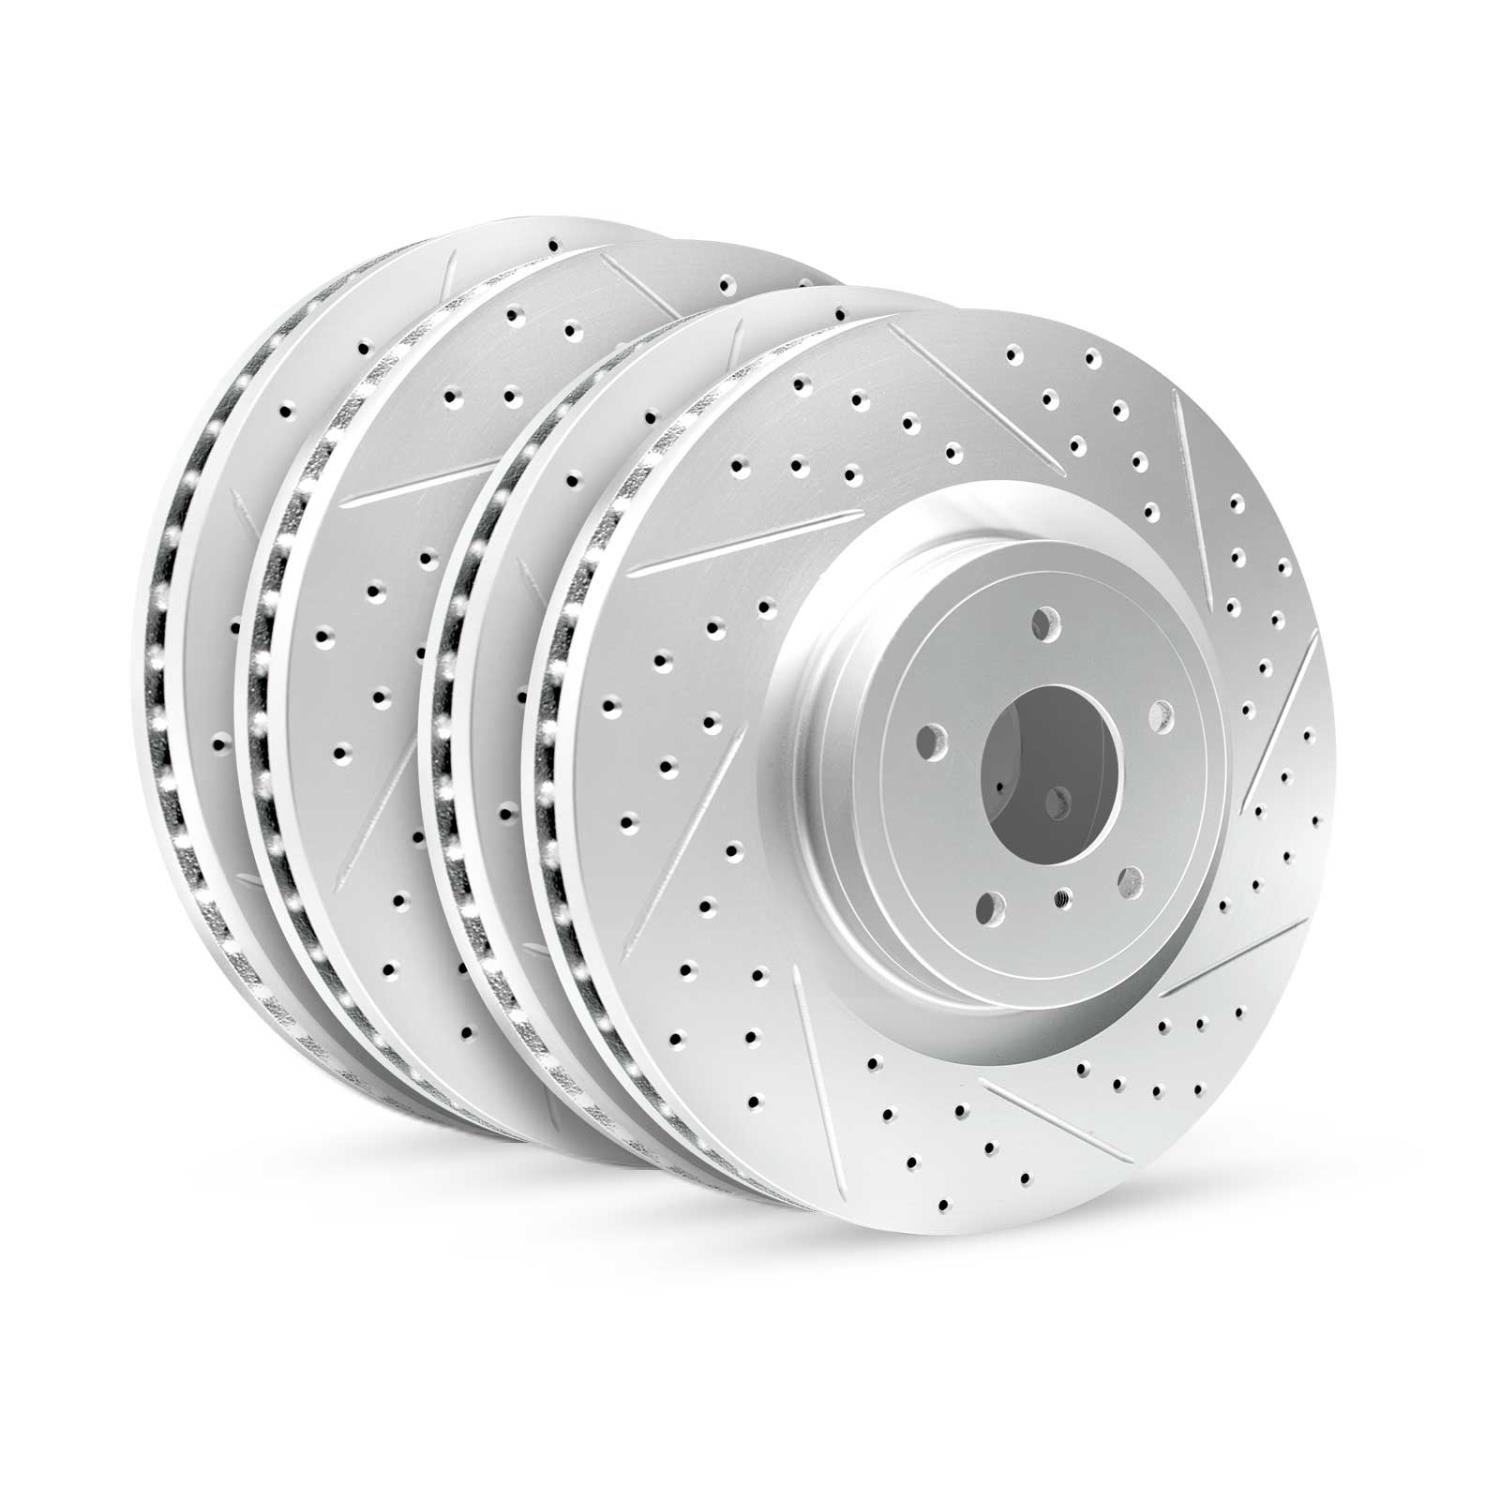 GEO-Carbon Drilled/Slotted Rotors, 2012-2017 Fits Multiple Makes/Models, Position: Front/Rear